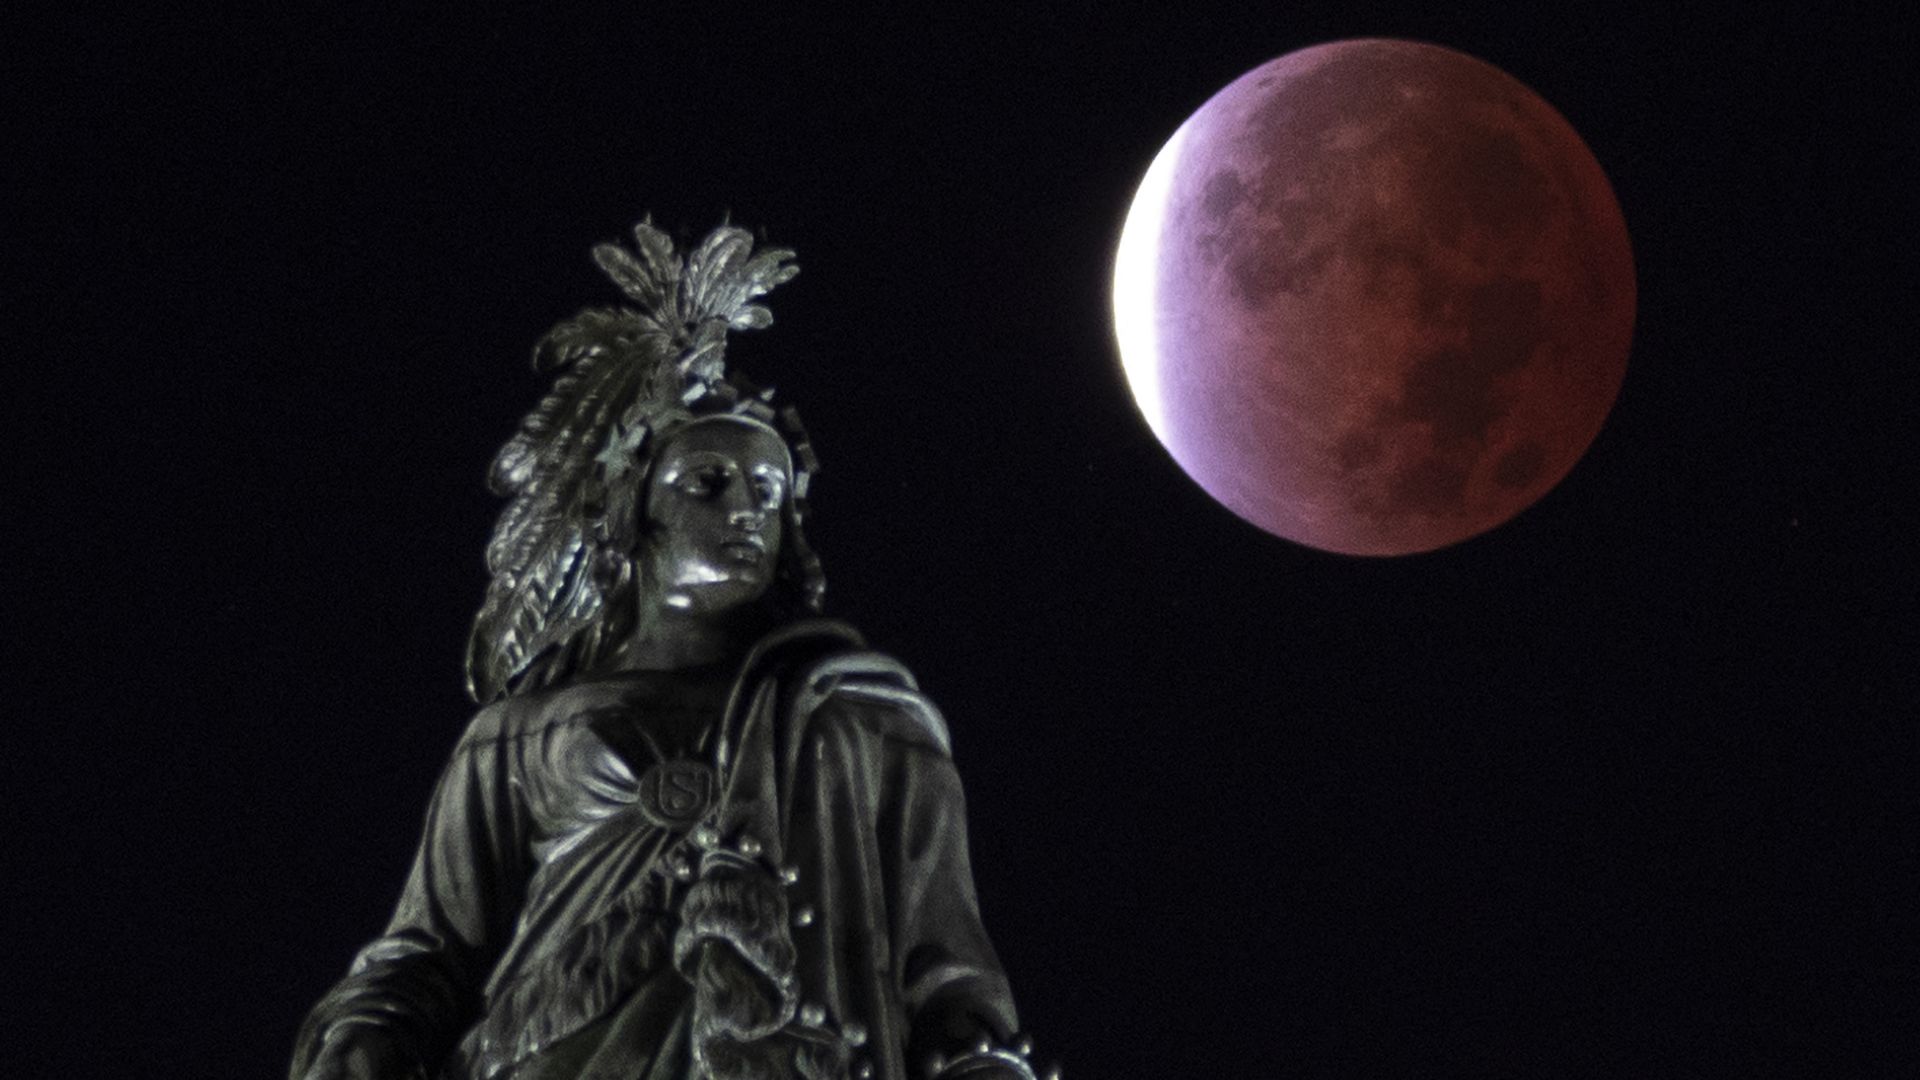 The moon in an eclipsed state is seen rising behind the statue atop the U.S. Capitol.